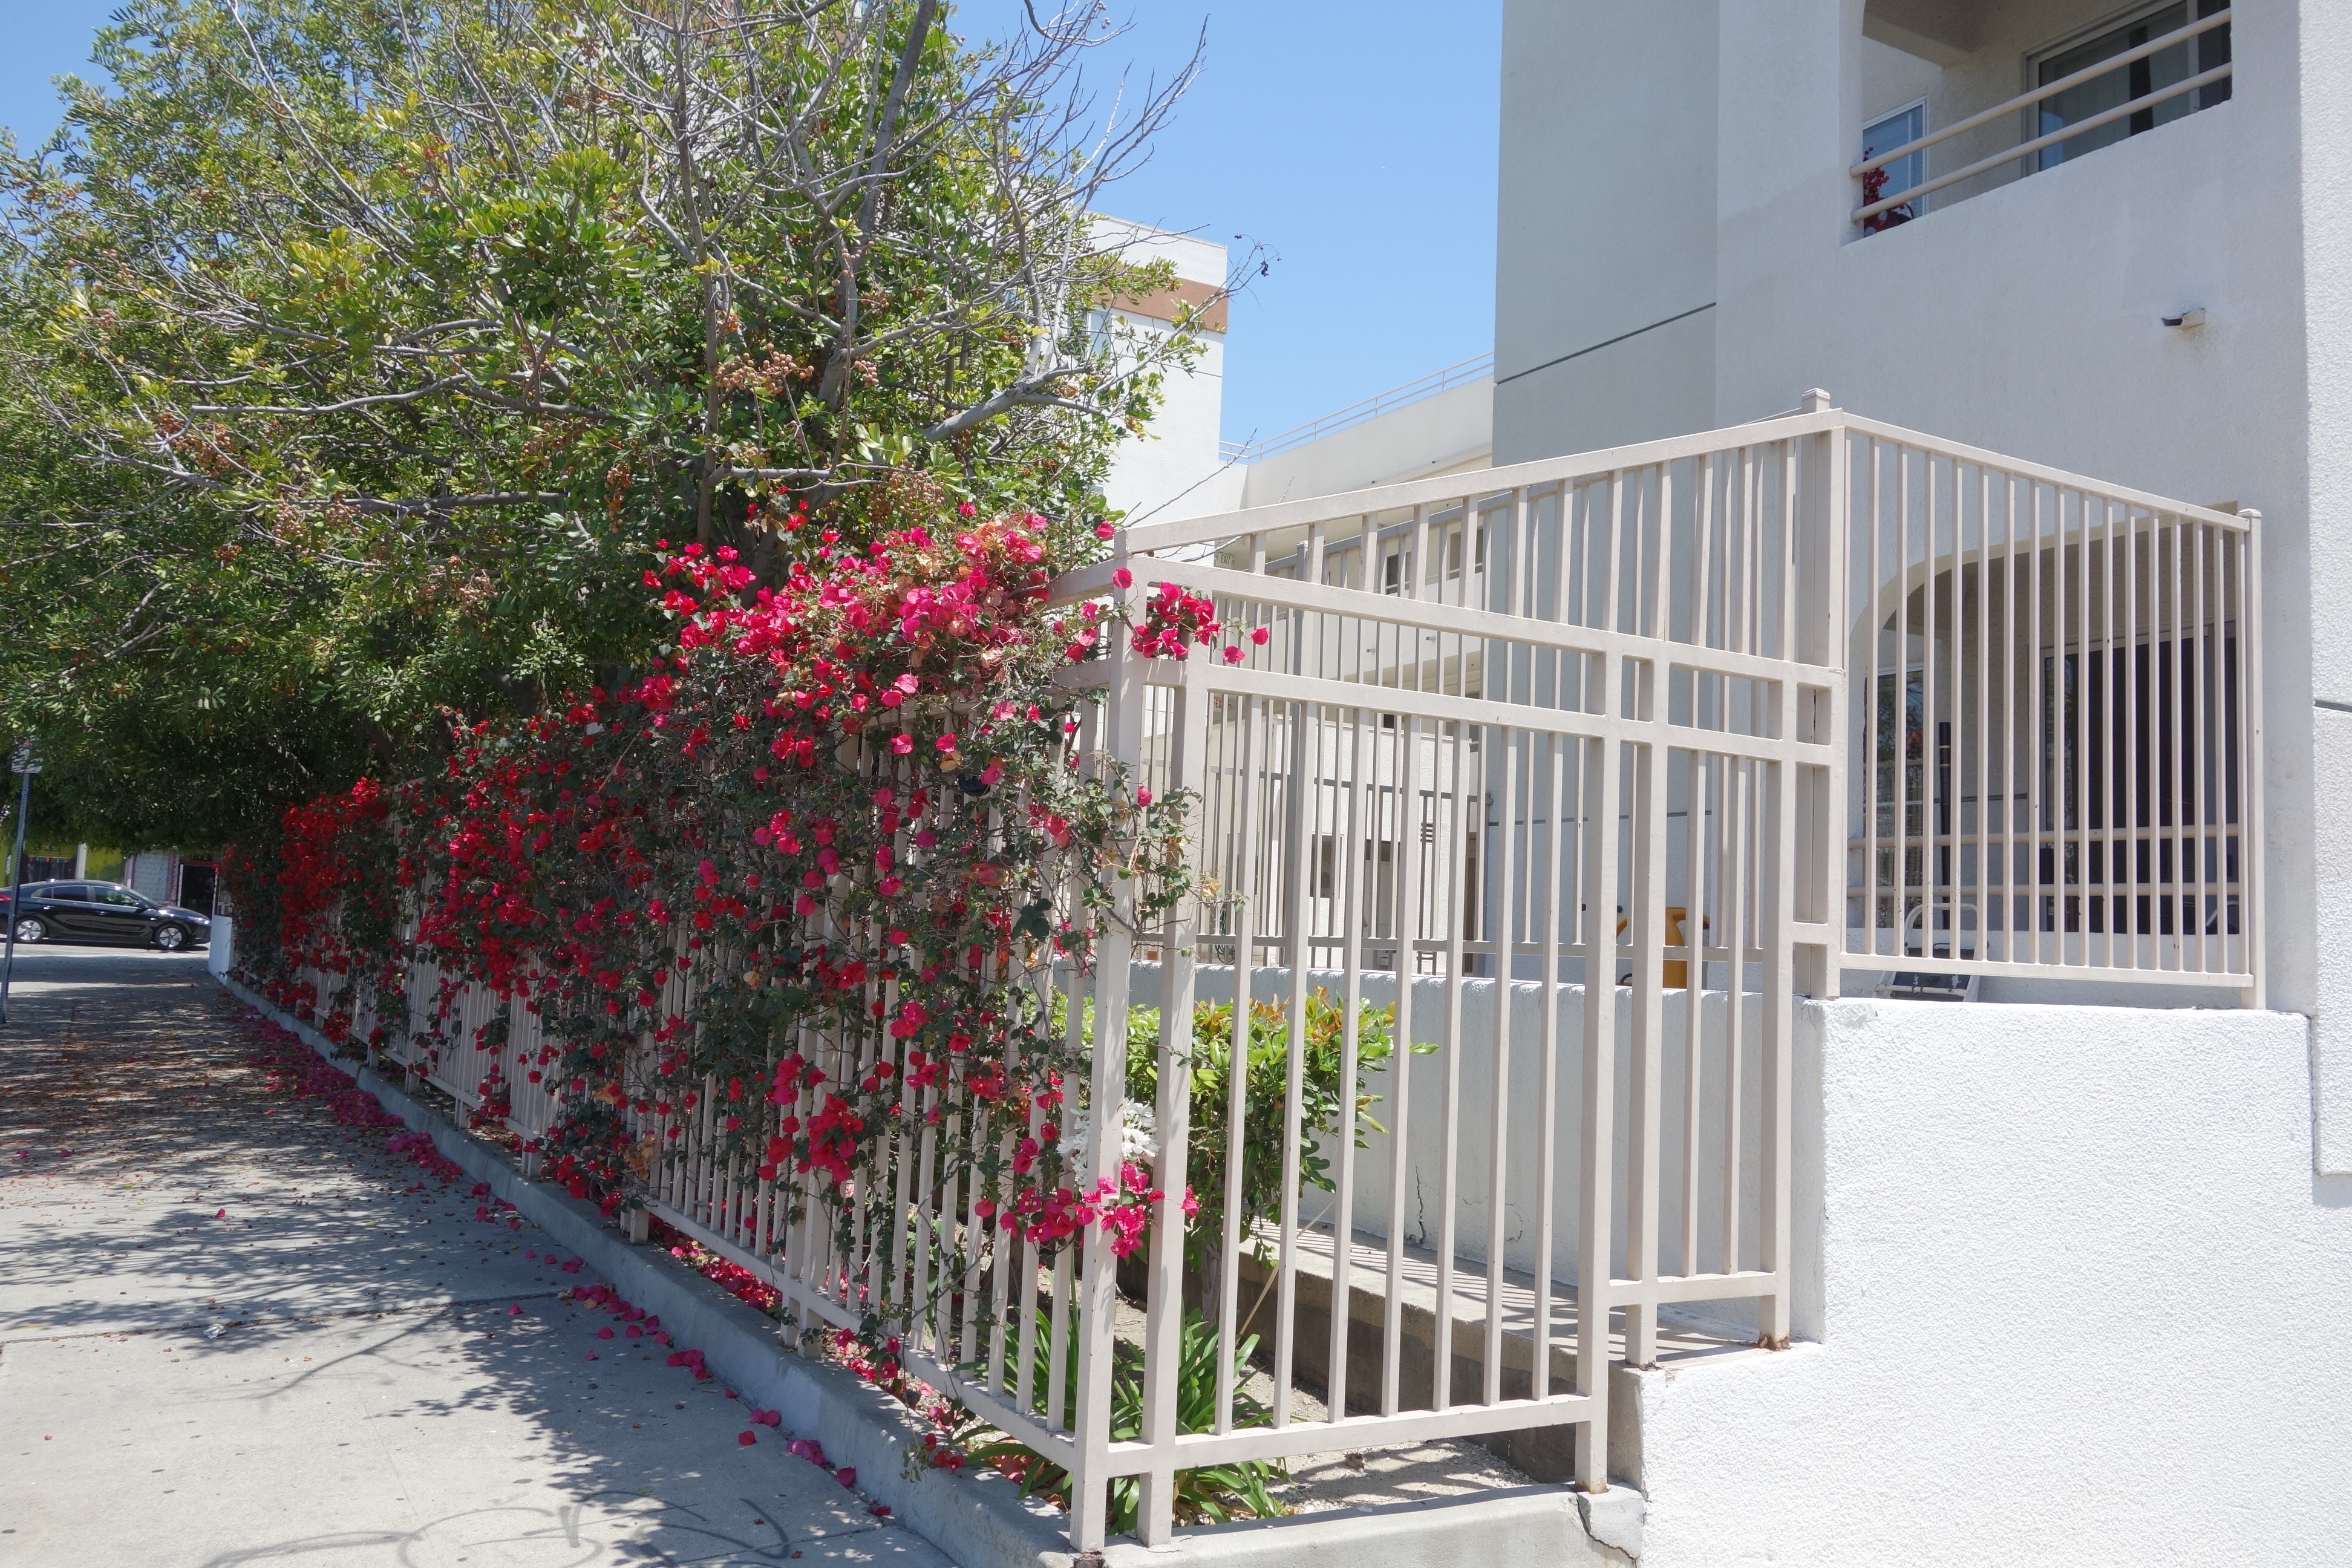 Front side view of central avenue villa. Large white gates covered in pink flowers in front of building.